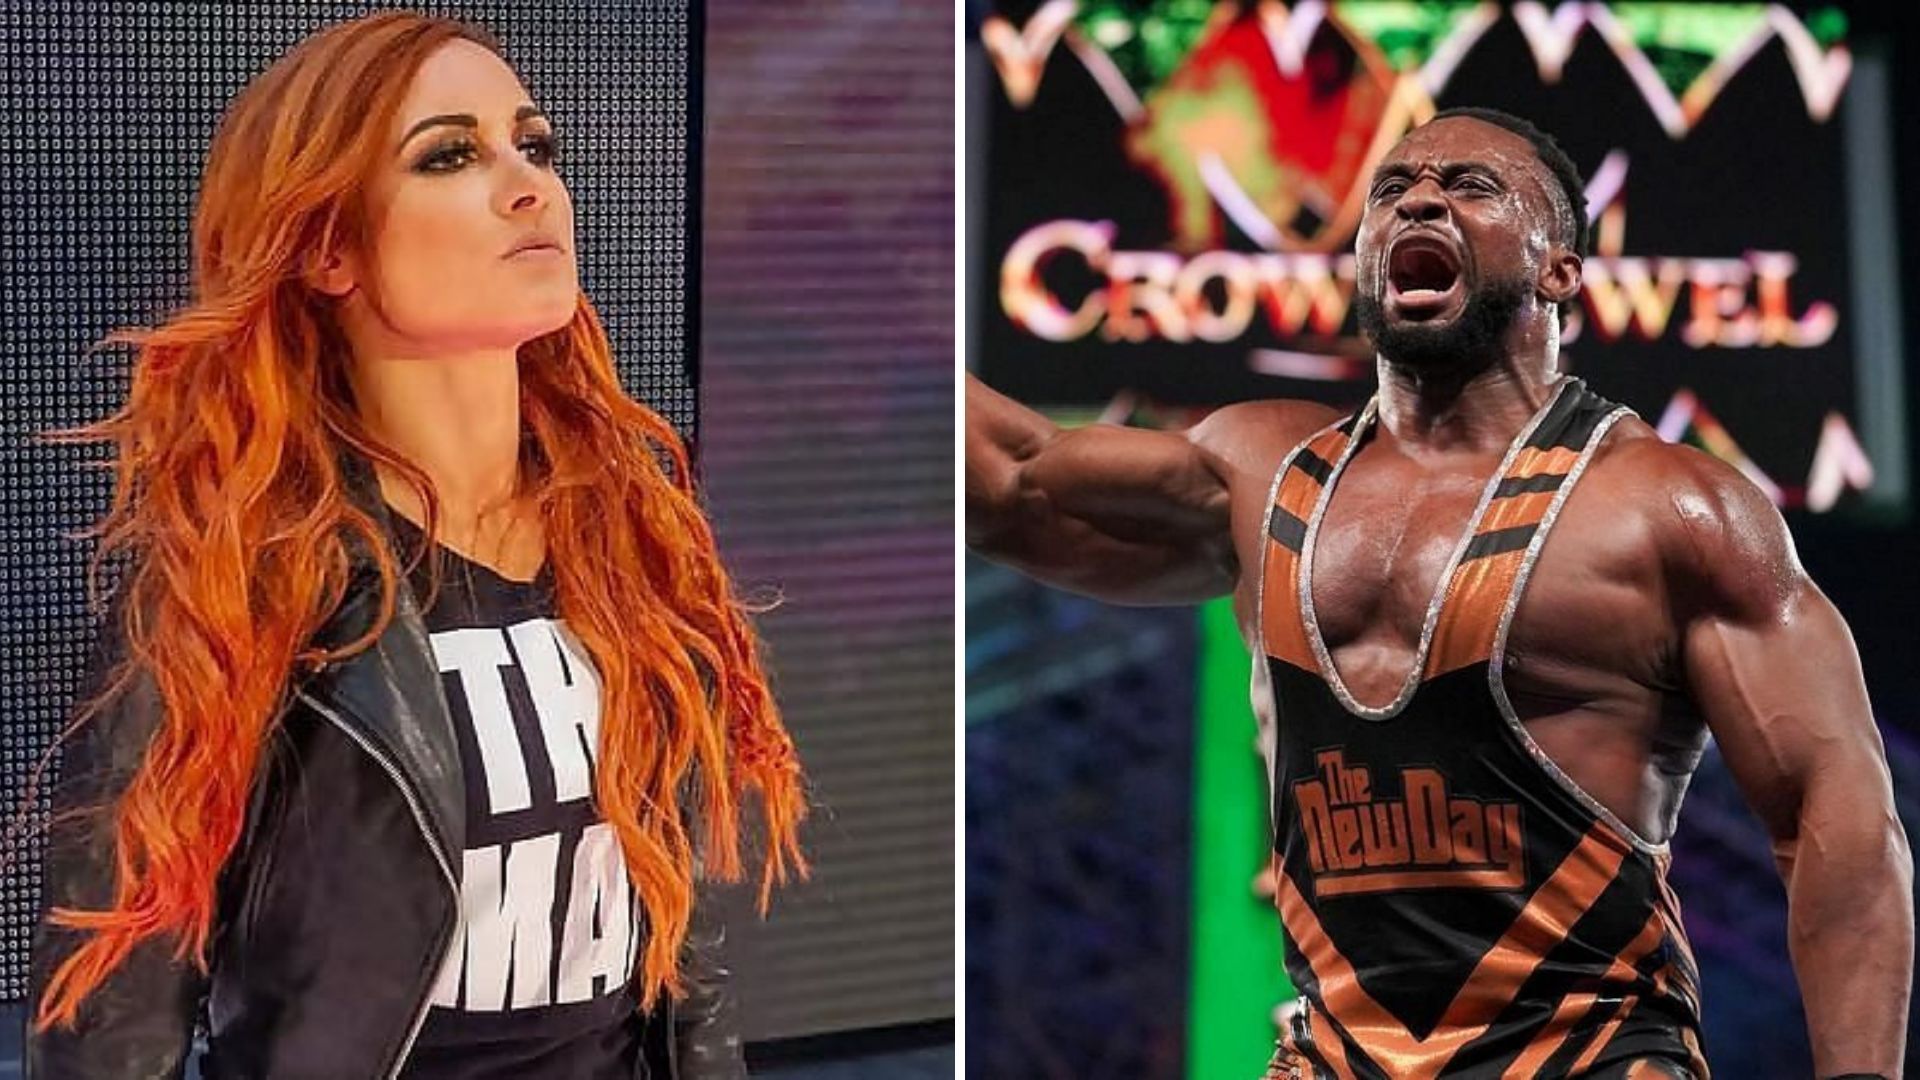 Big E and Becky Lynch defended their title tonight.